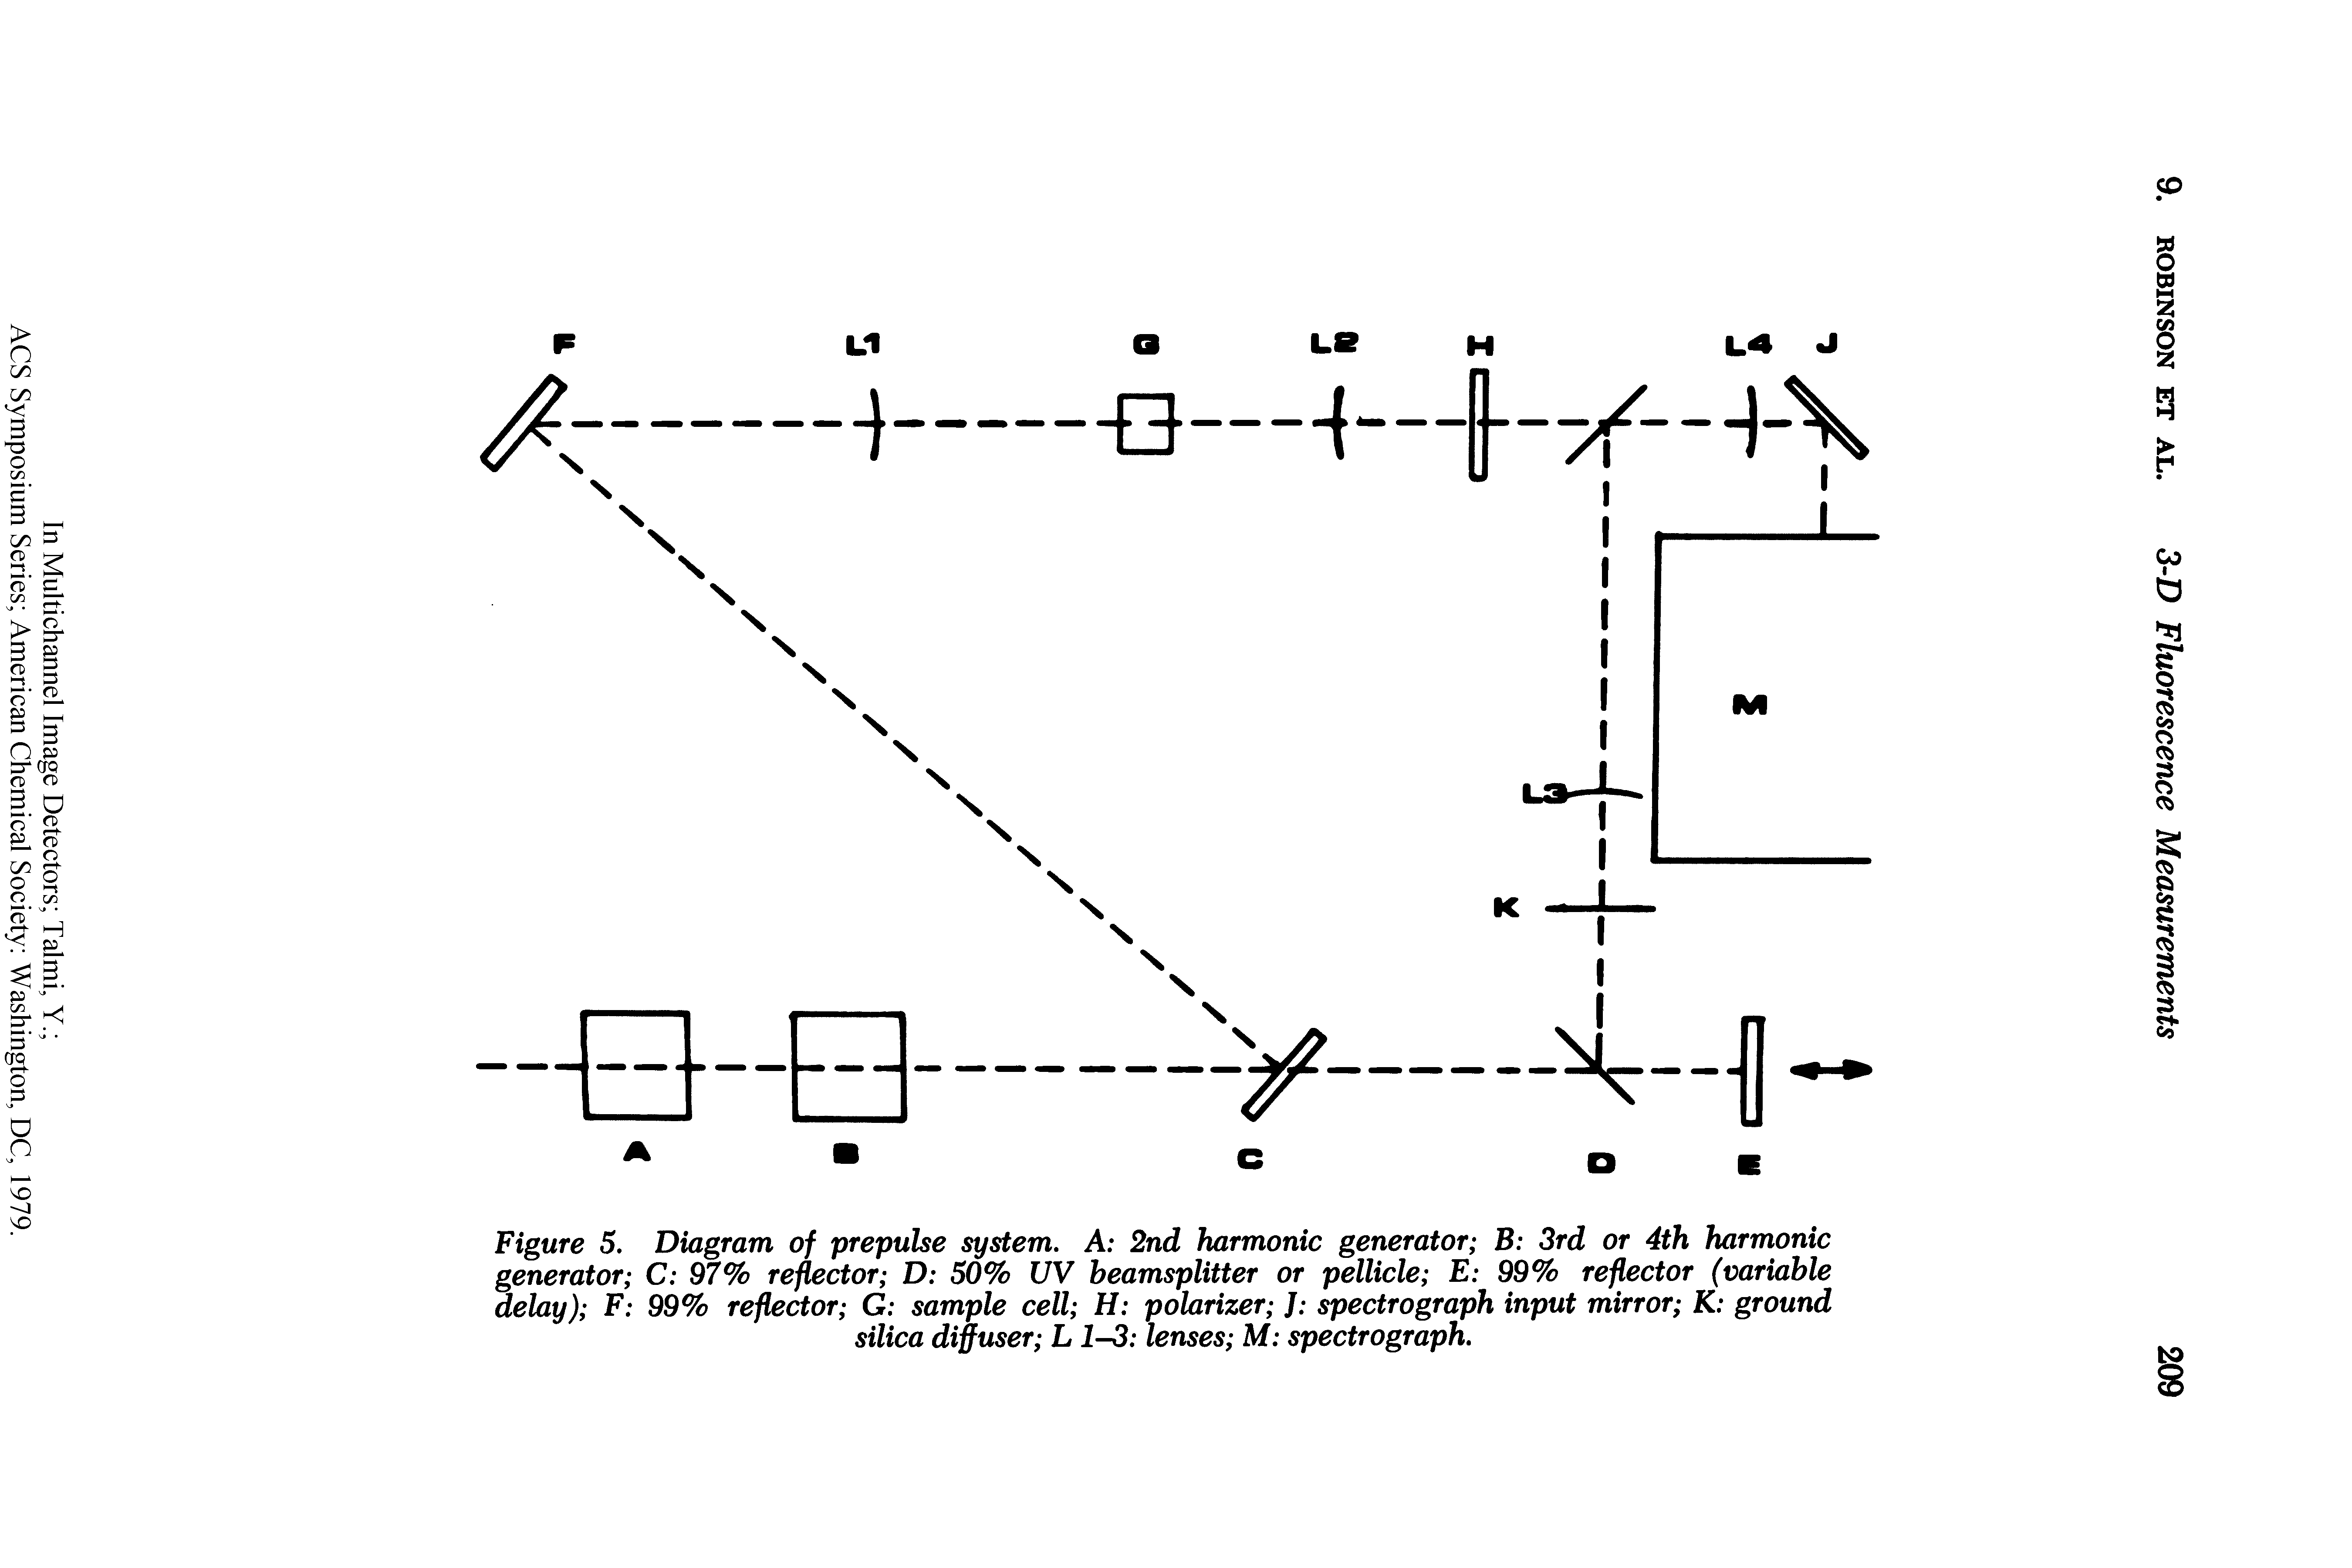 Figure 5. Diagram of prepulse system. A 2nd harmonic generator B 3rd or 4th harmonic generator C 97% reflector D 50% UV beamsplitter or pellicle E 99% reflector (variable delay) F 99% reflector G sample cell H polarizer J spectrograph input mirror K ground silica diffuser L1-3 lenses M spectrograph.